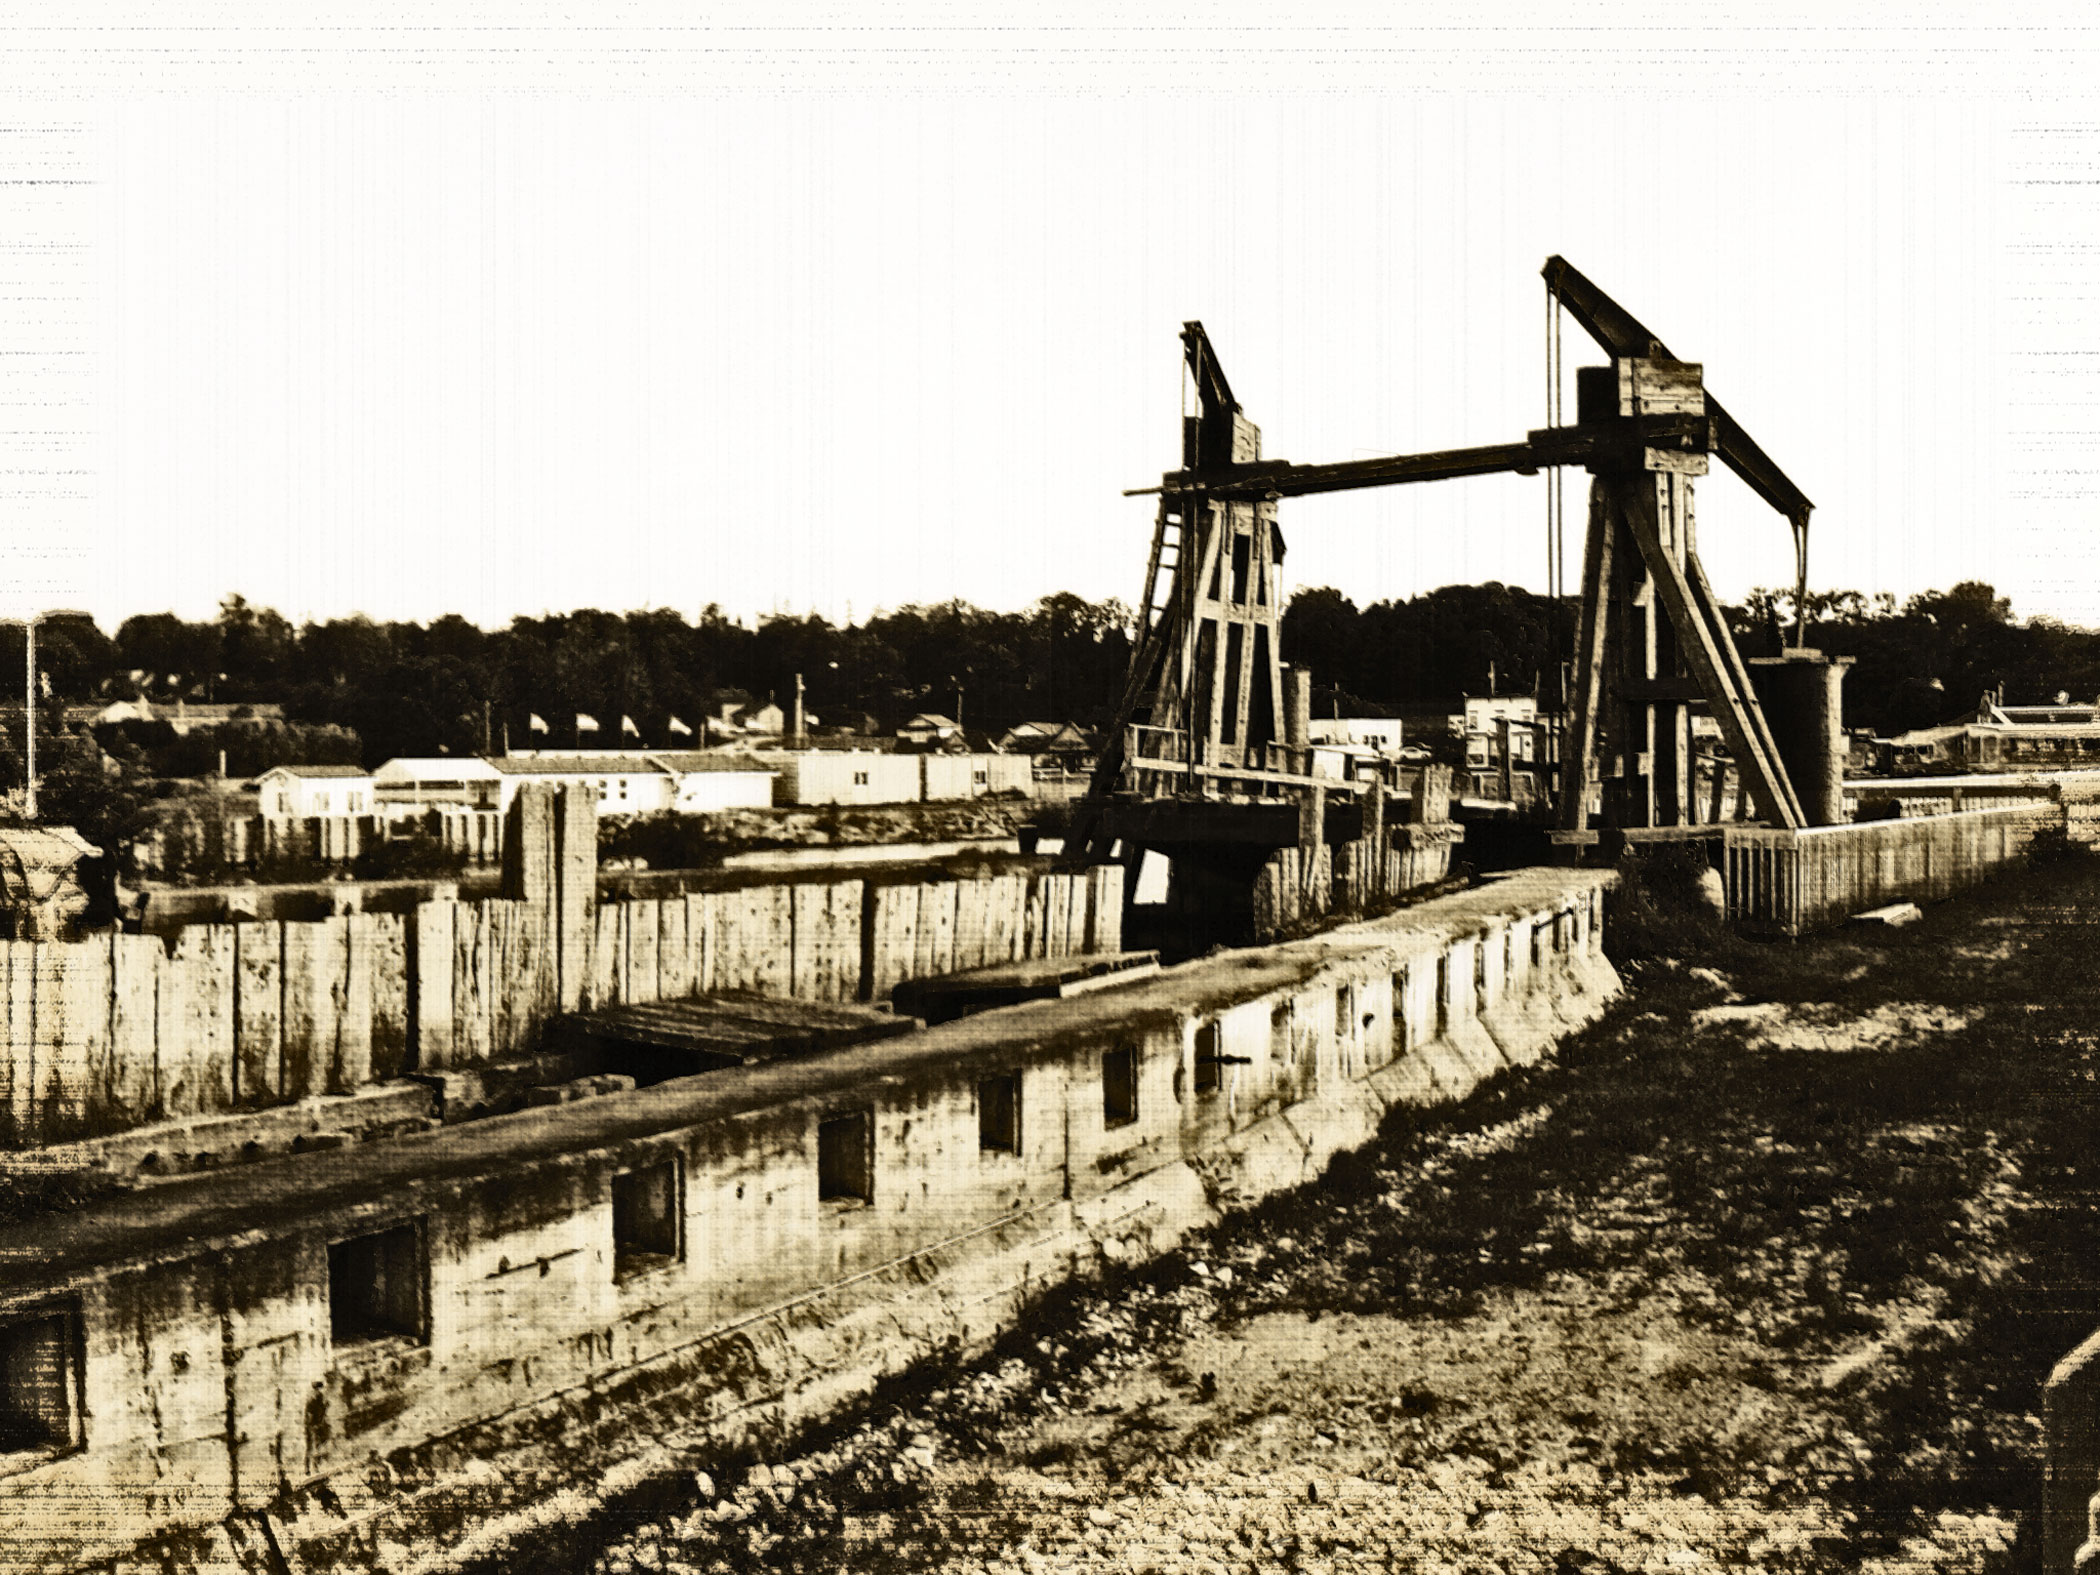 This dock was the railroad link crossing the Straits of Mackinac; The Chief Wawatam, docked here to unload rail cars and cargo from 1911 to 1984. The “Chief Dock” was then converted into a park located in downtown St. Ignace.